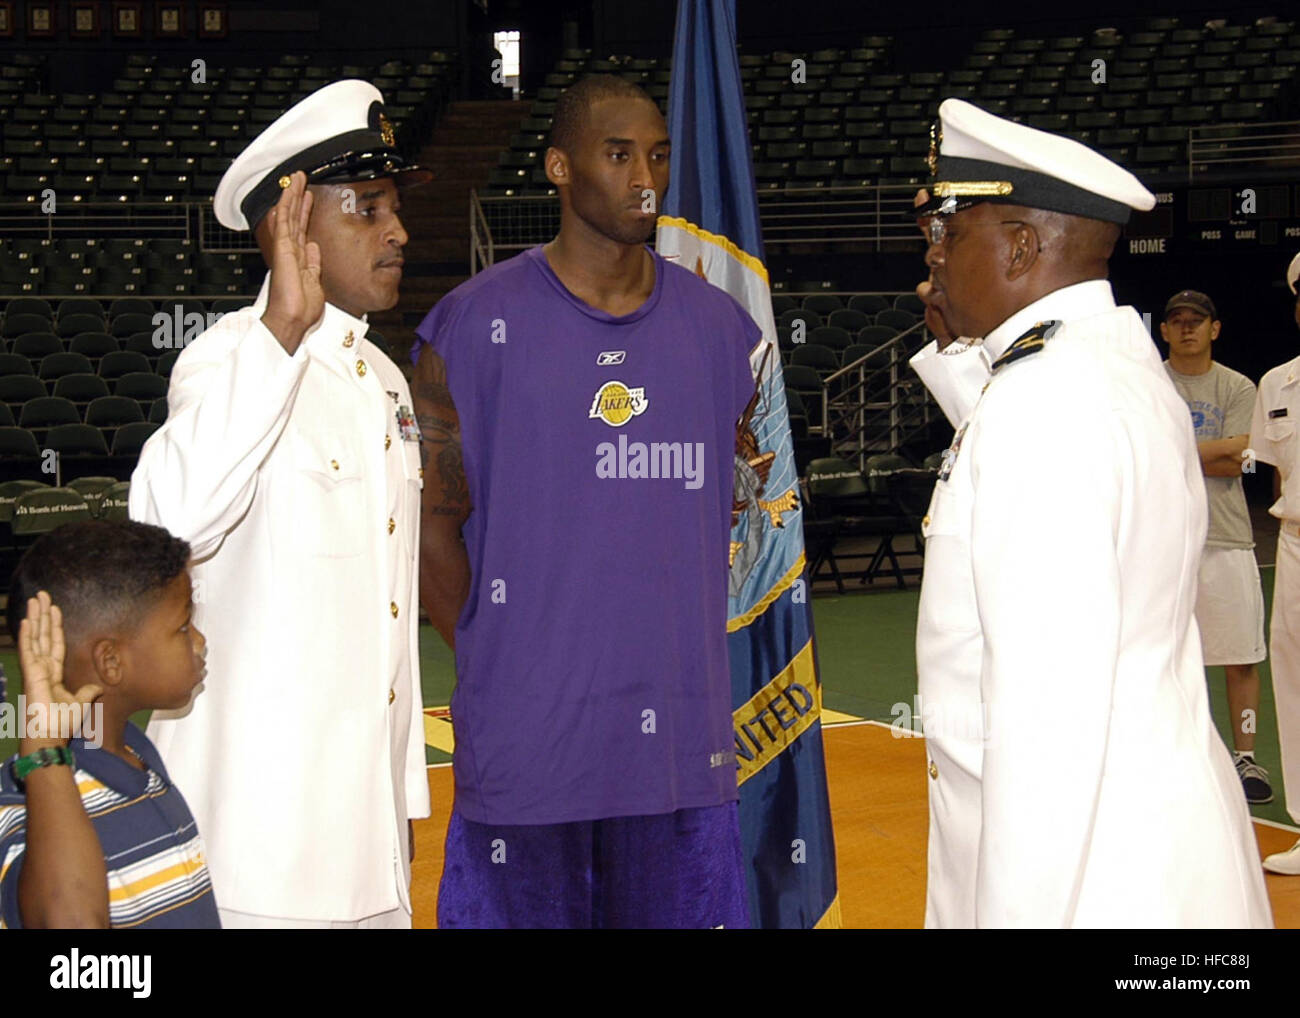 051007-N-6775N-010 Honolulu, Hawaii (Oct. 7, 2005) Ð National Basketball Association (NBA) star Kobe Bryant accompanies U.S. Navy Chief Yeoman Lawrence A. Sivils and his son while being sworn in during his reenlistment at the University of Hawaii, Manoa's Stan Sheriff Center. Chief Sivils, who is assigned to the staff of Seal Delivery Vehicle Team One, is a fan of the Lakers and Kobe Bryant.  The Lakers were in Honolulu for an upcoming exhibition game. U.S. Navy photo by Photographer's Mate 2nd Class Justin P. Nesbitt (RELEASED) Kobe Bryant 05 Stock Photo